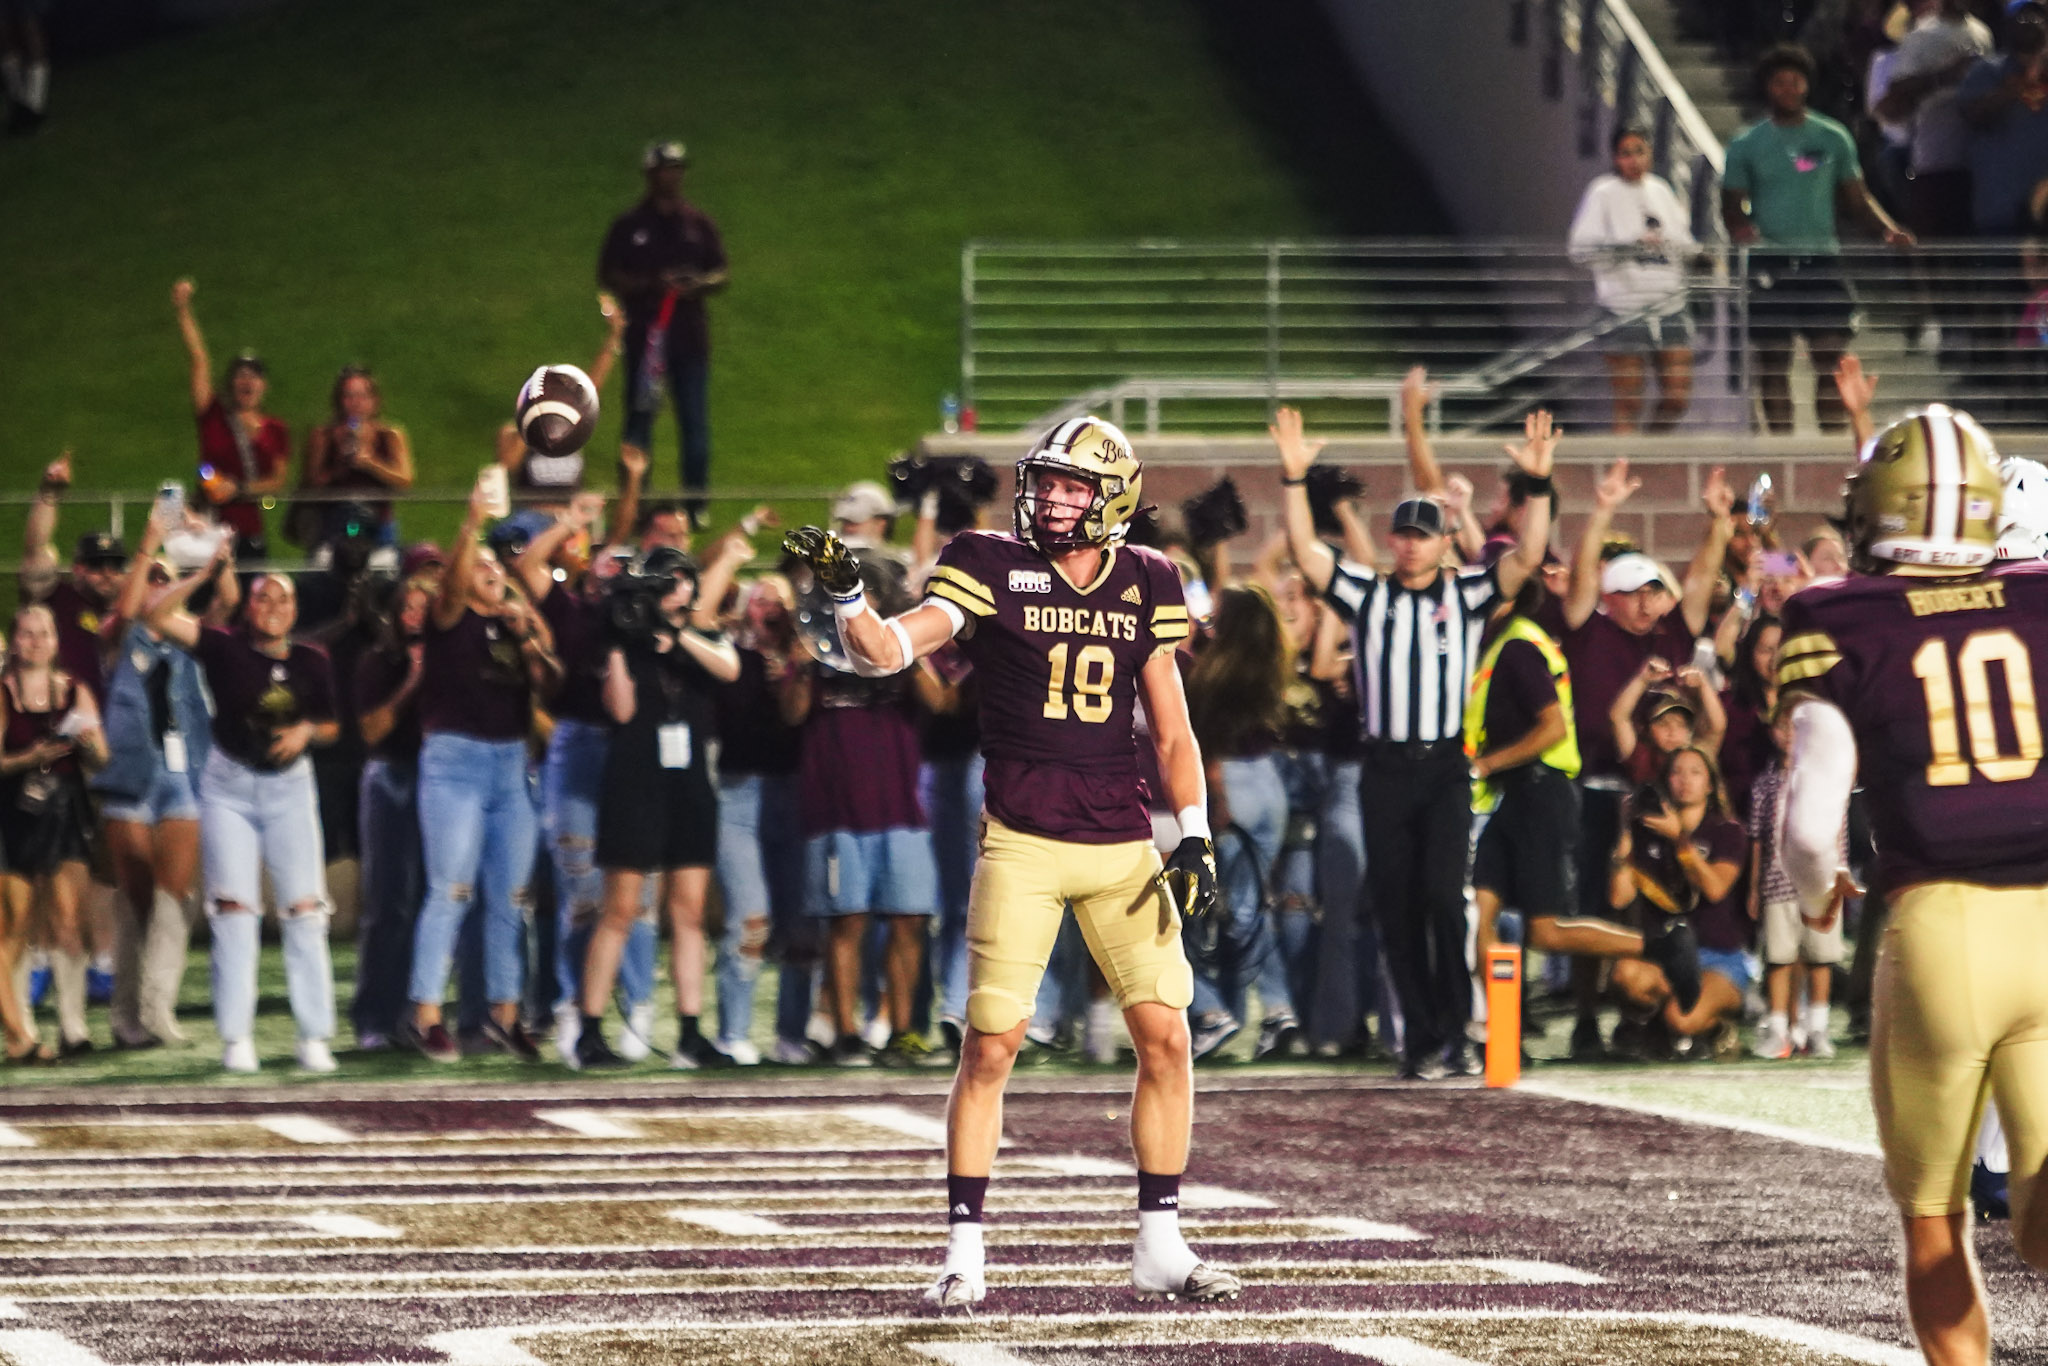 Bobcats wide receiver in maroon and gold (18) celebrates a touchdown